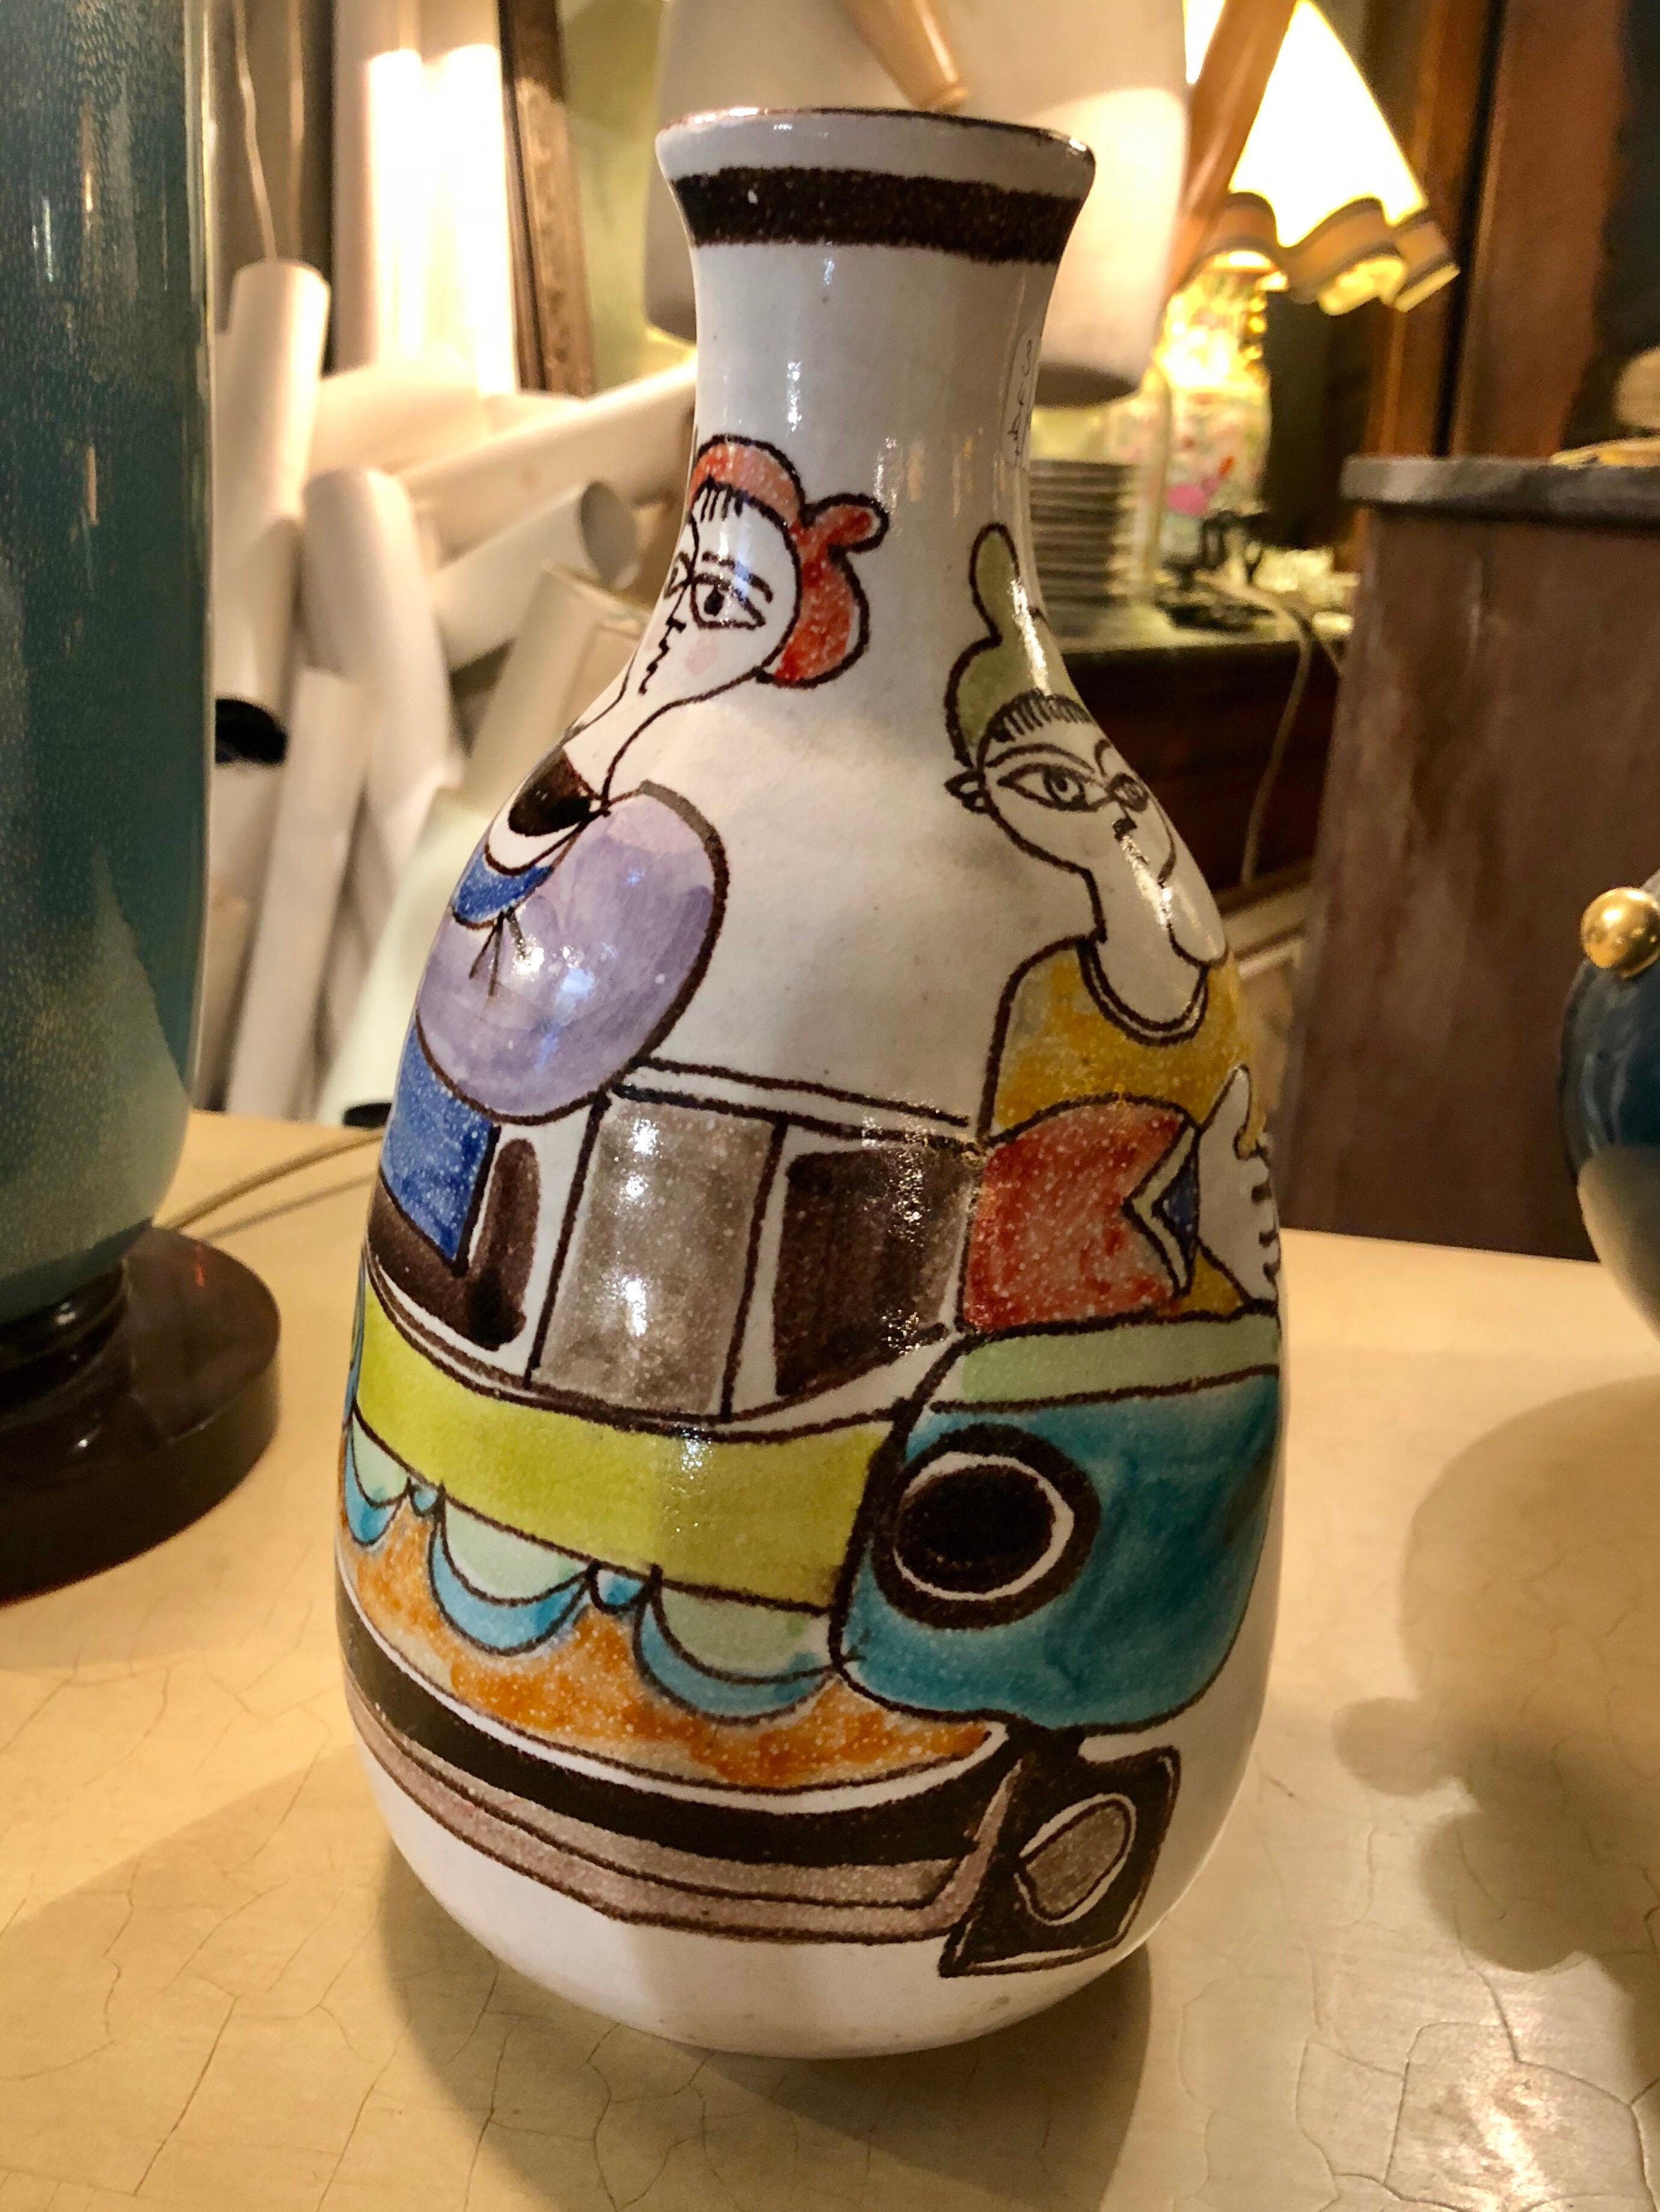 Ceramic vase designed by Giovanni De Simone. Manufactured by himself, circa 1960. Handmade with characteristic drawing and glaze in excellent condition. Signed with artists signature.

Complimentary shipping worldwide!

The brand, Ceramiche De